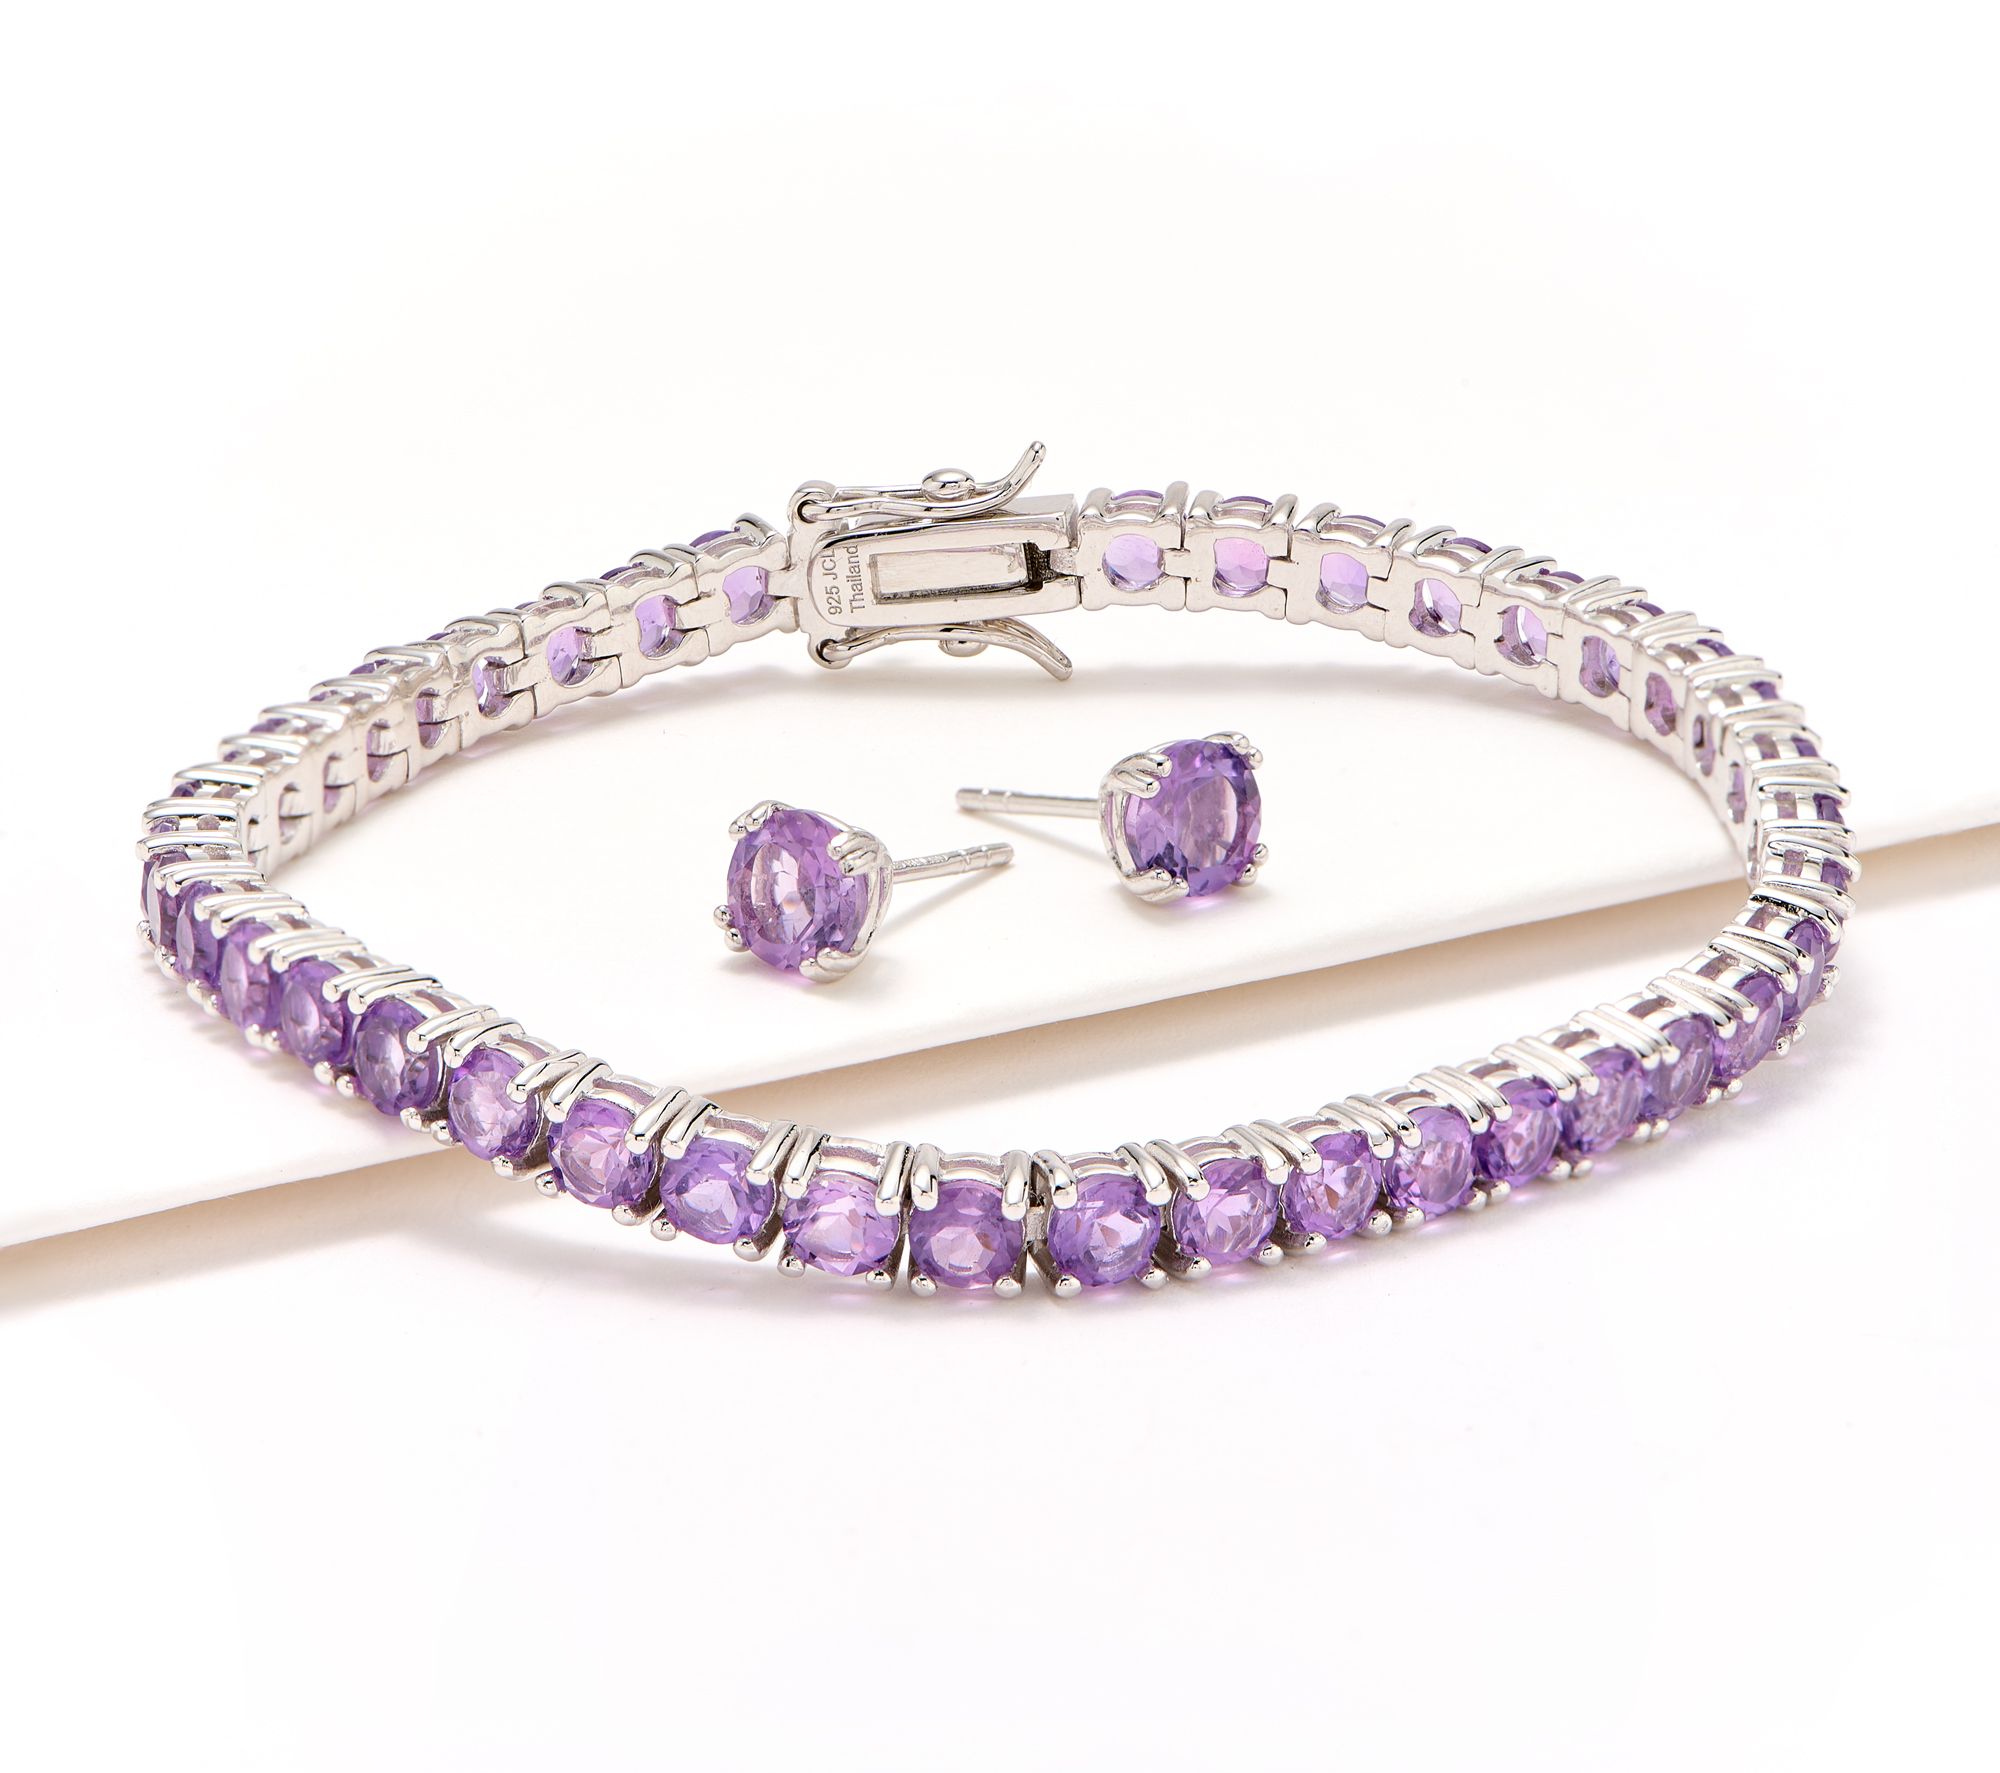 Sterling Silver Padlock Bracelet with Accent Stone and Genuine Diamond Stone